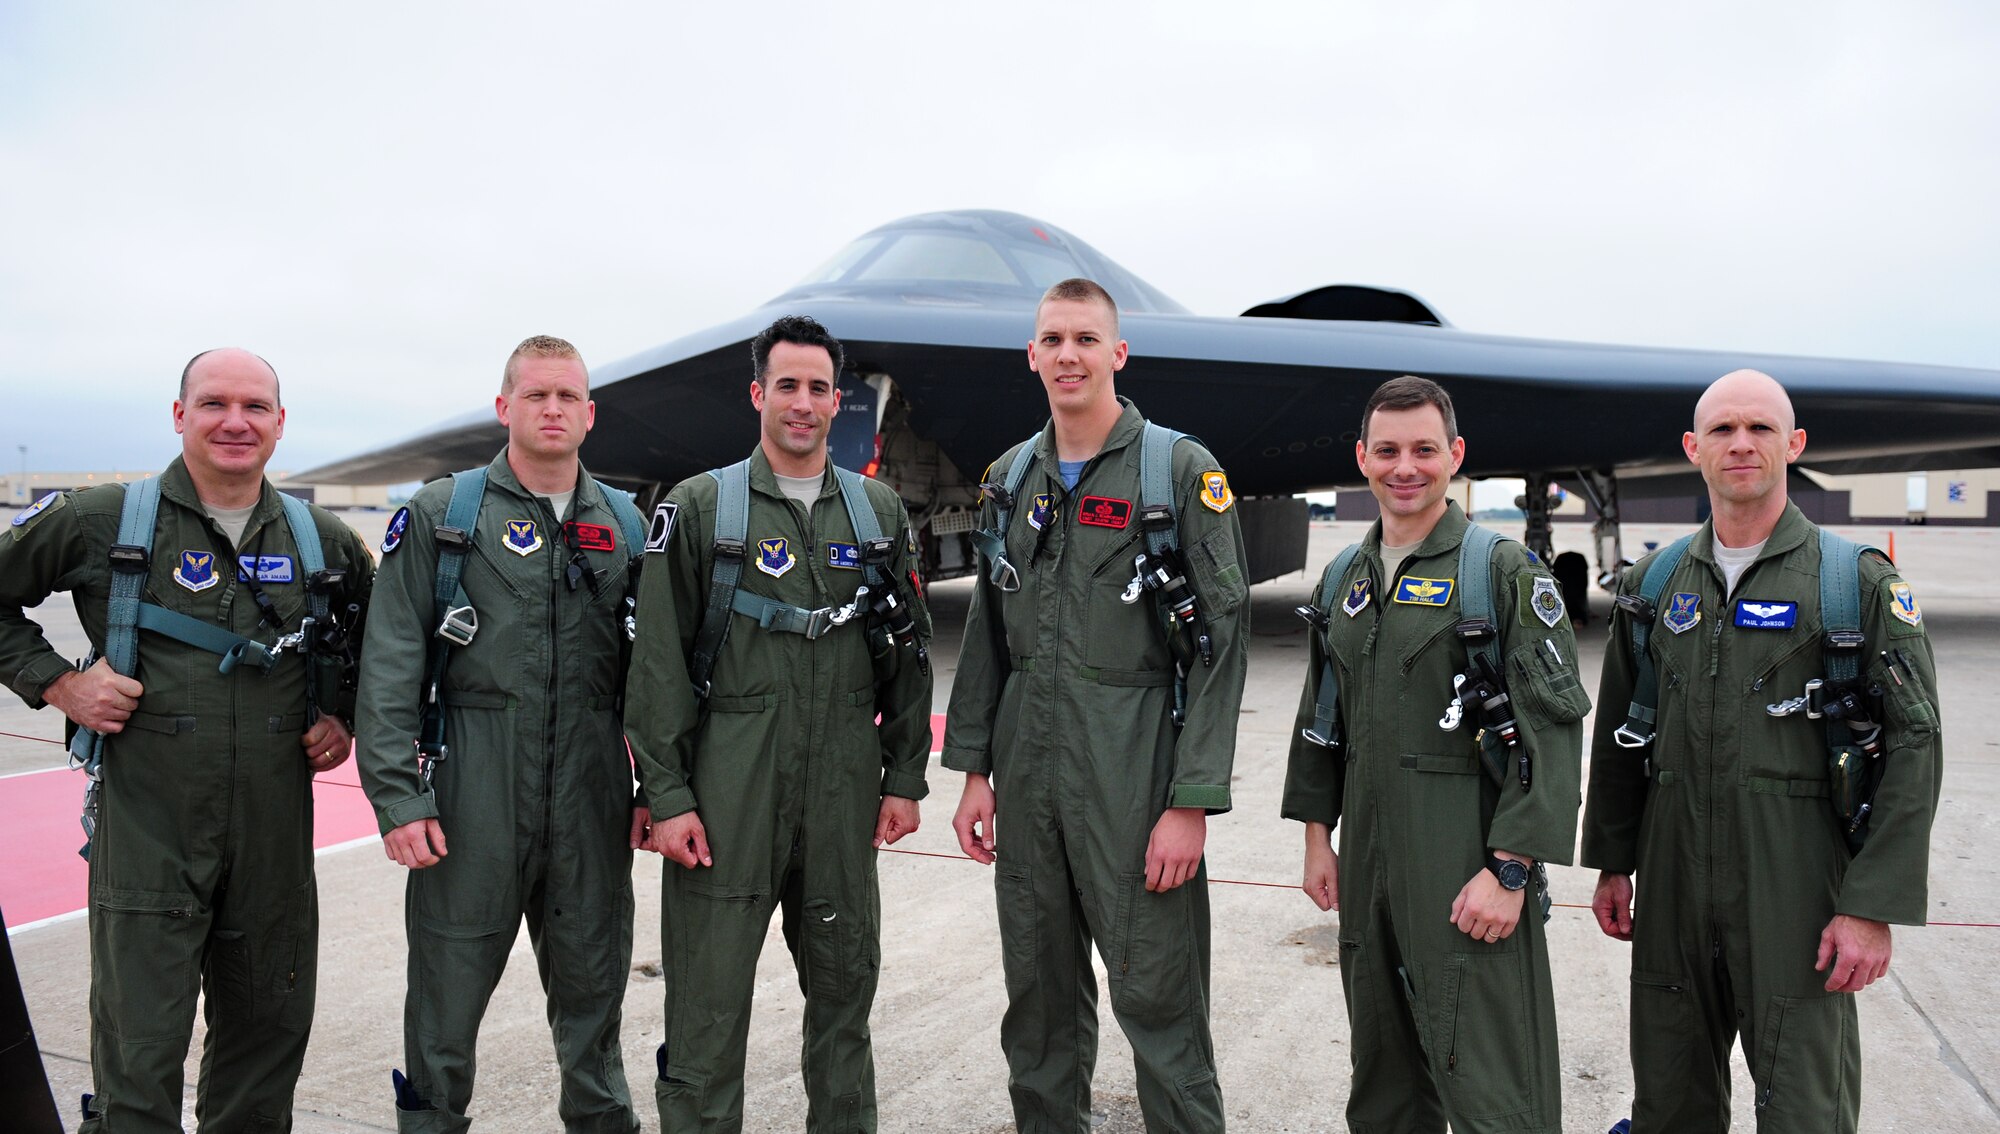 Pilots, as well as three Crew Chiefs of the Year, pose in front of a B-2 Spirit before receiving an incentive flight at Whiteman Air Force Base, Mo., July 10, 2015. The dedicated crew chiefs were awarded with the incentive flights for being named Crew Chiefs of the Year at the group and MAJCOM levels. (U.S. Air Force photo by Senior Airman Joel Pfiester /Released)